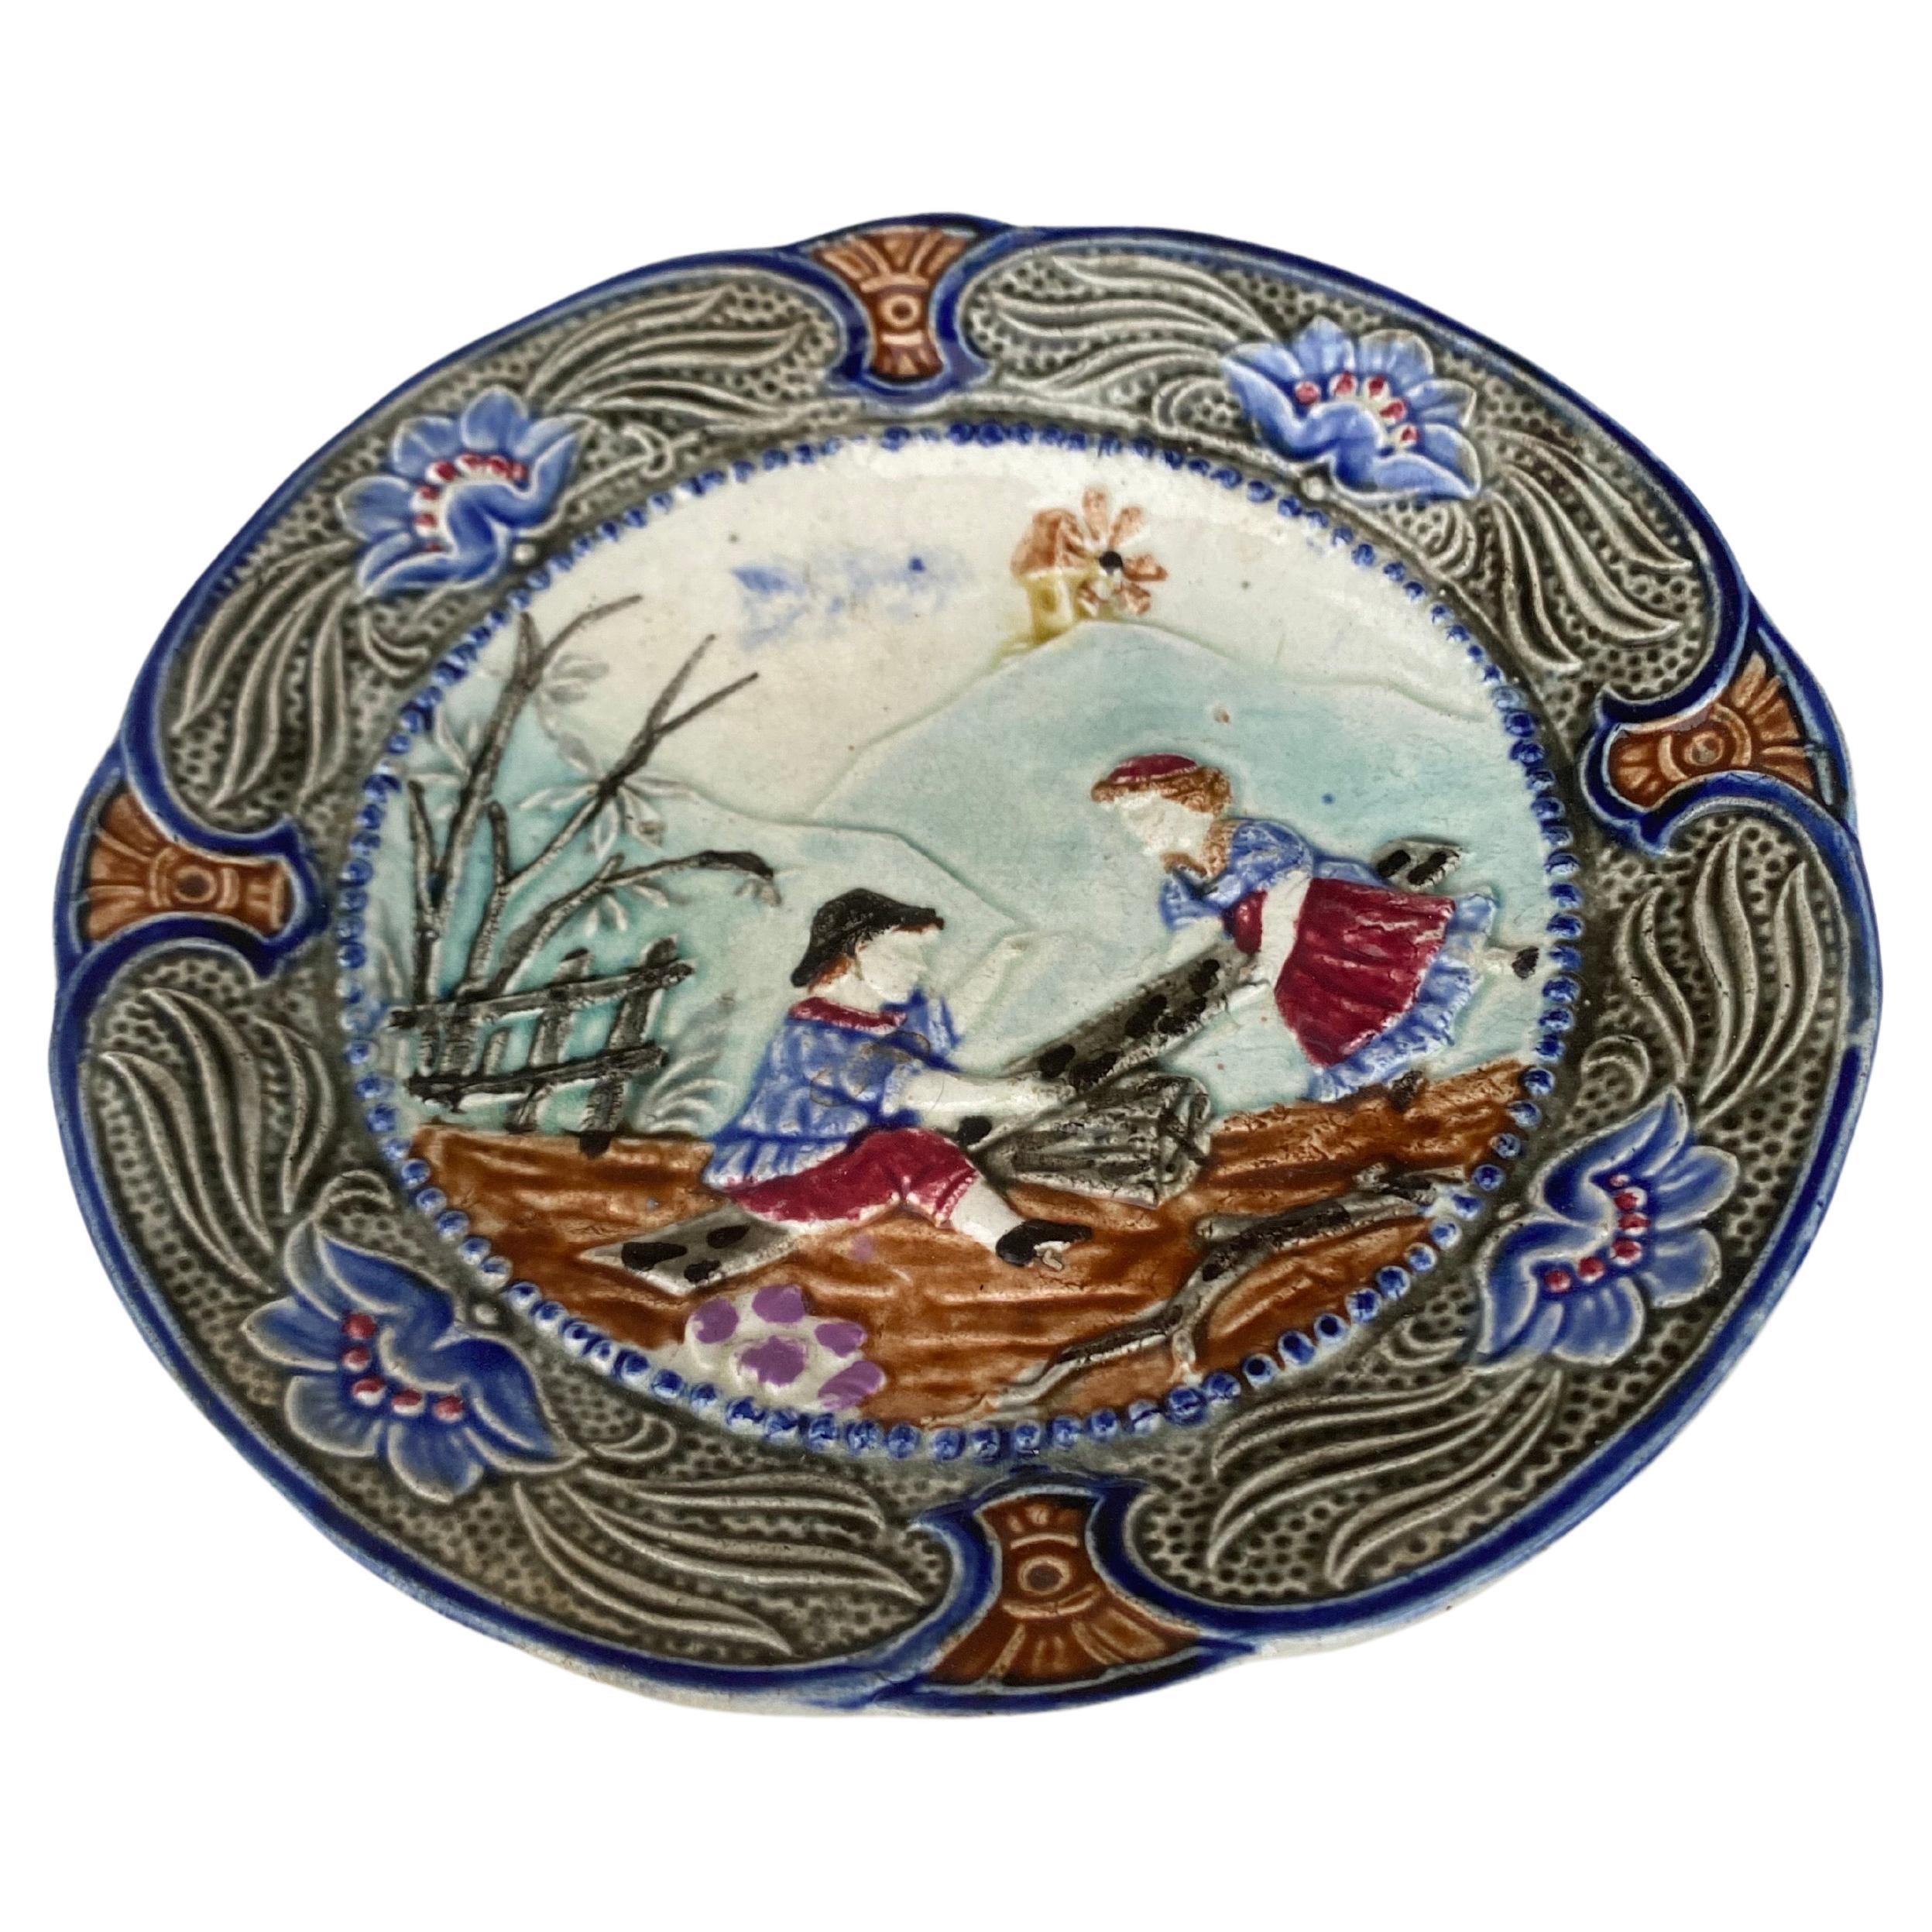 19th Century Majolica plate Wasmuel.
Childrens playing.